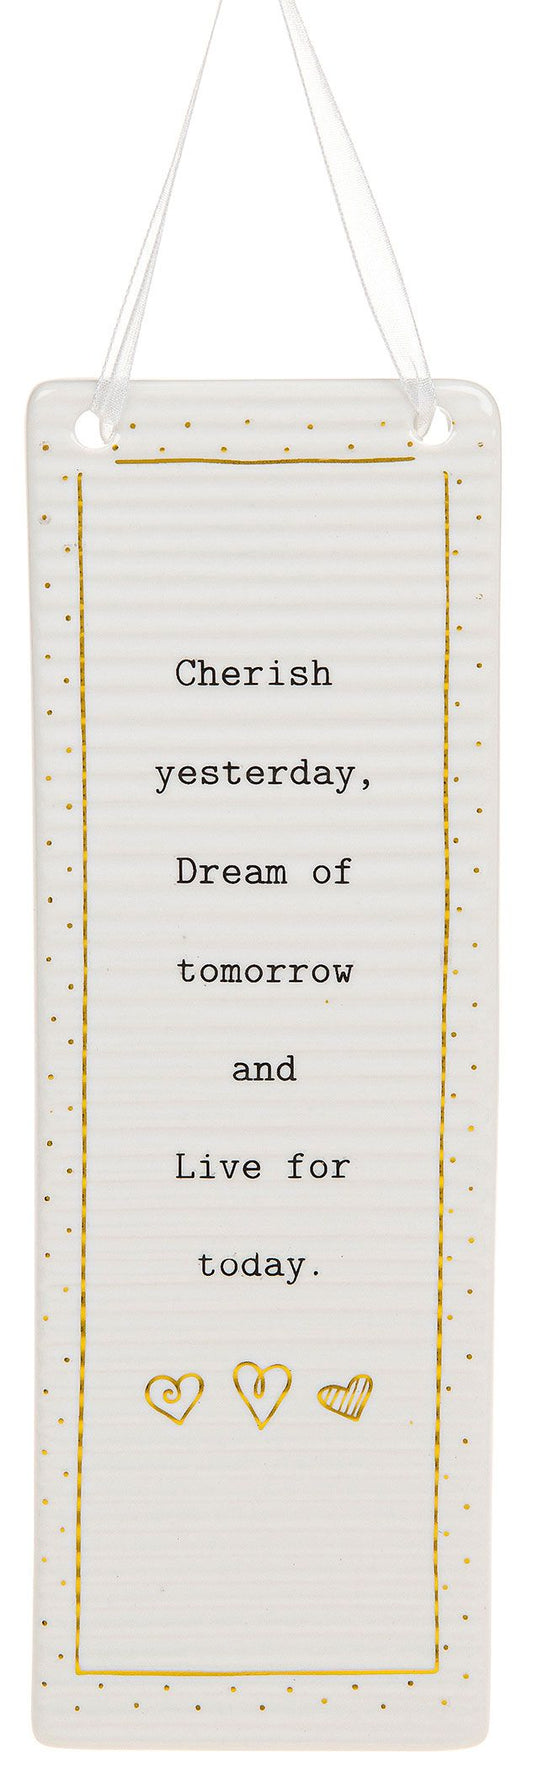 Cherish yesterday dream of tomorrow and live for today. Rectangle hanging plaque.